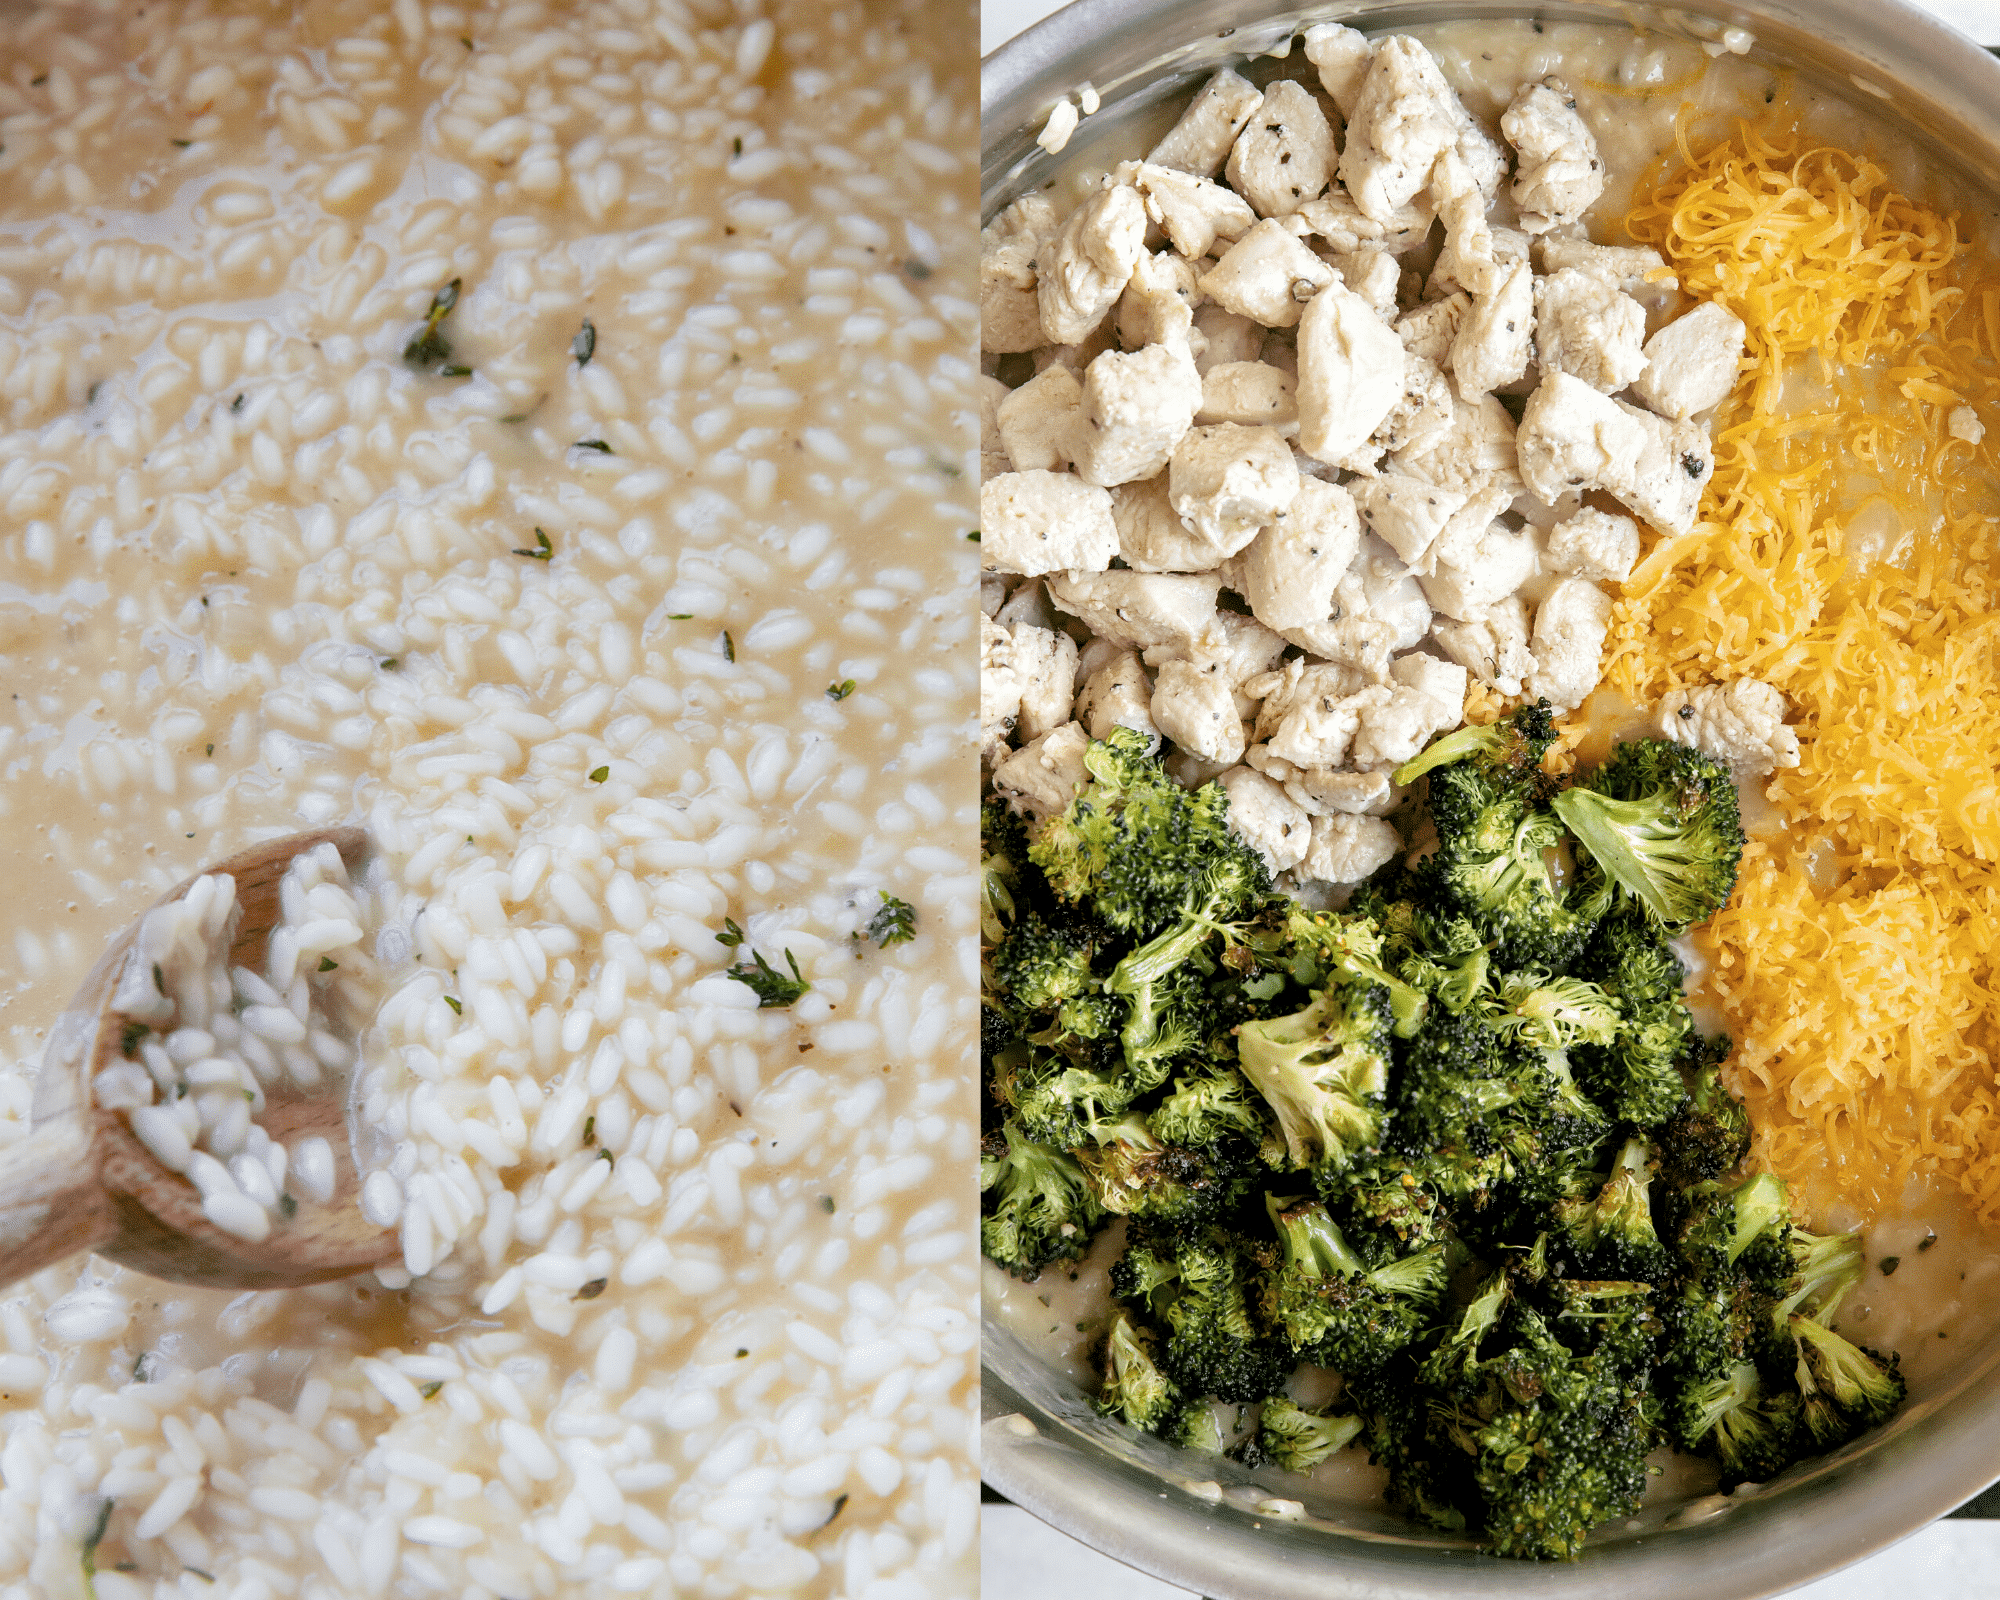 risotto in a skillet with a wooden spoon and cheddar, chicken and broccoli on risotto